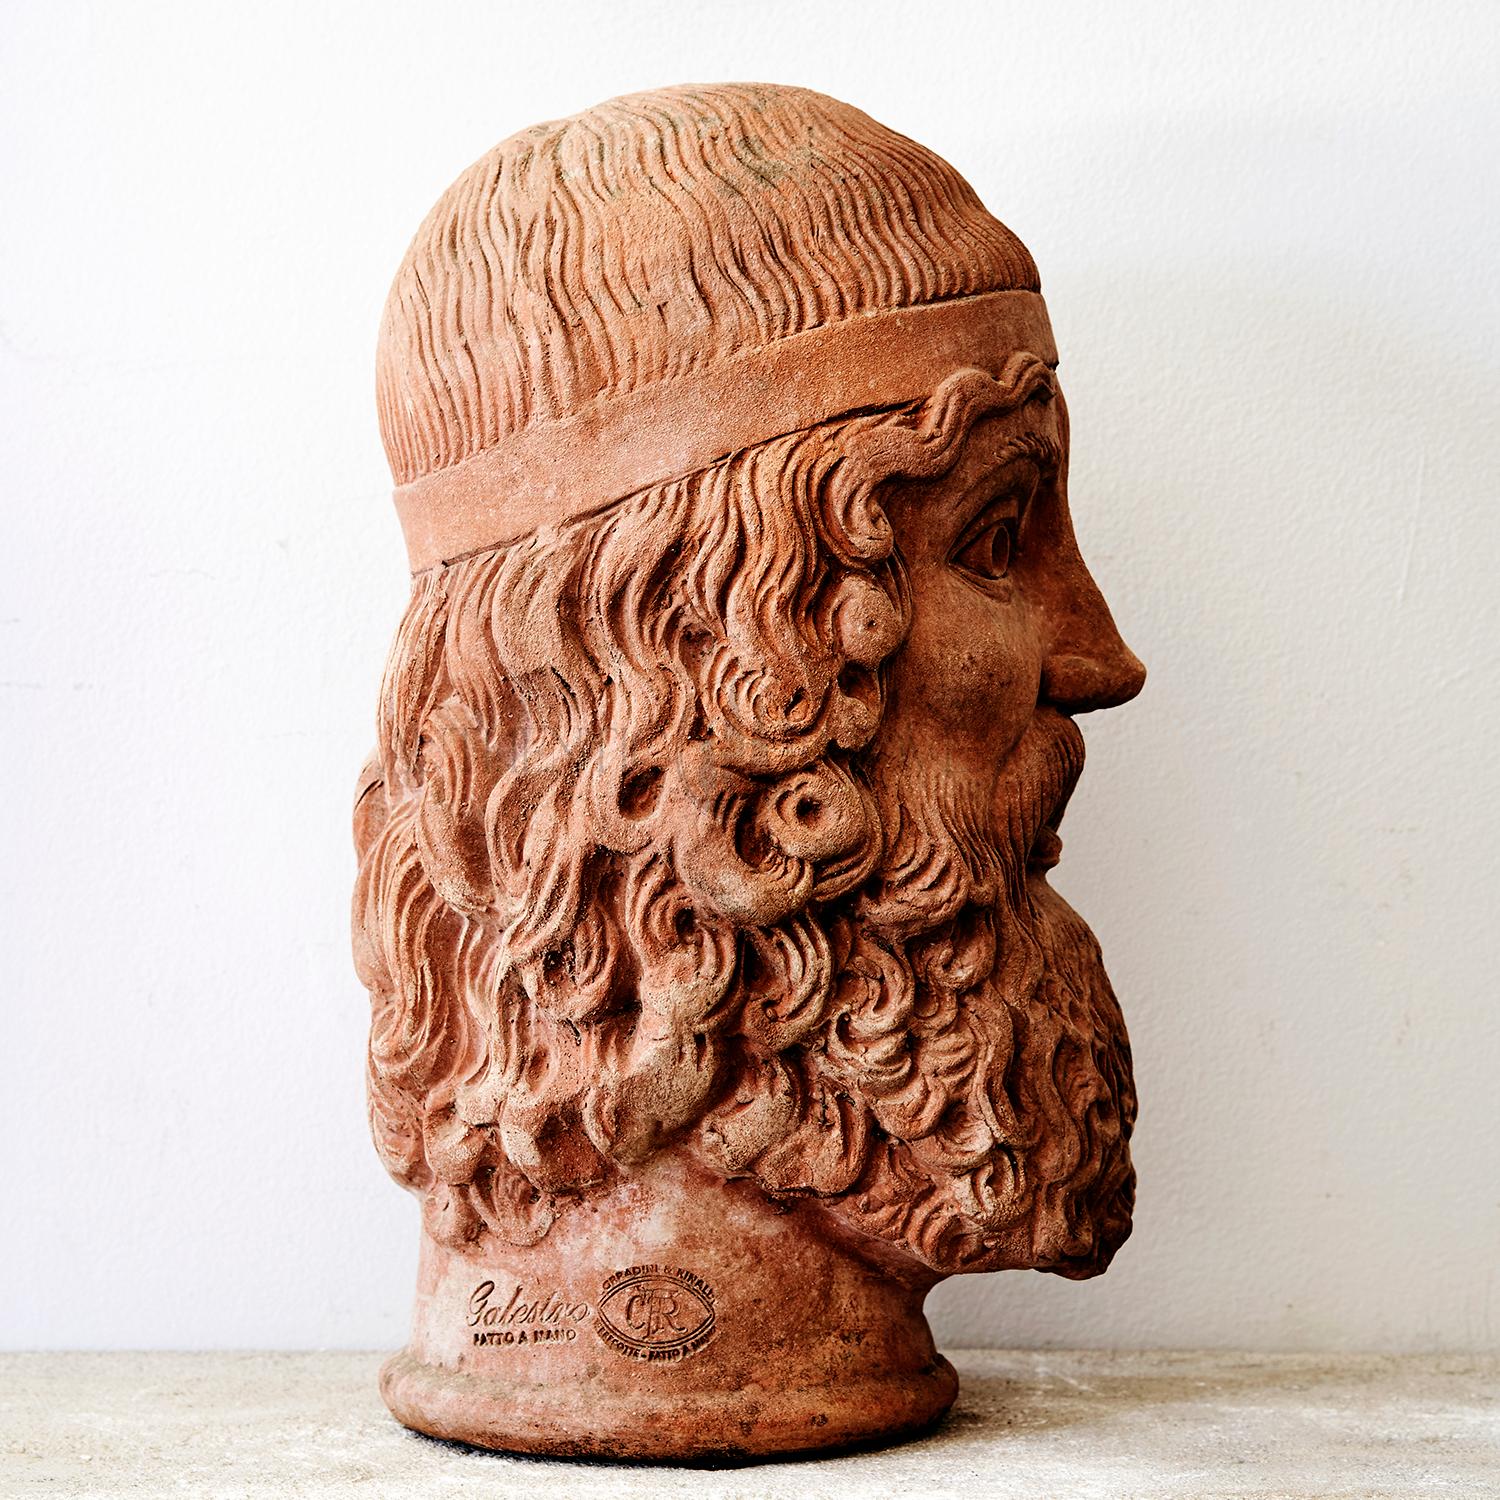 This vintage Italian detailed head is made of hand crafted terracotta clay, in good condition. Wear consistent with age and use. circa 1918, Italy.

Bronzo di Riace was one of the Greek bronze of naked bearded warriors found in the sea near Riace